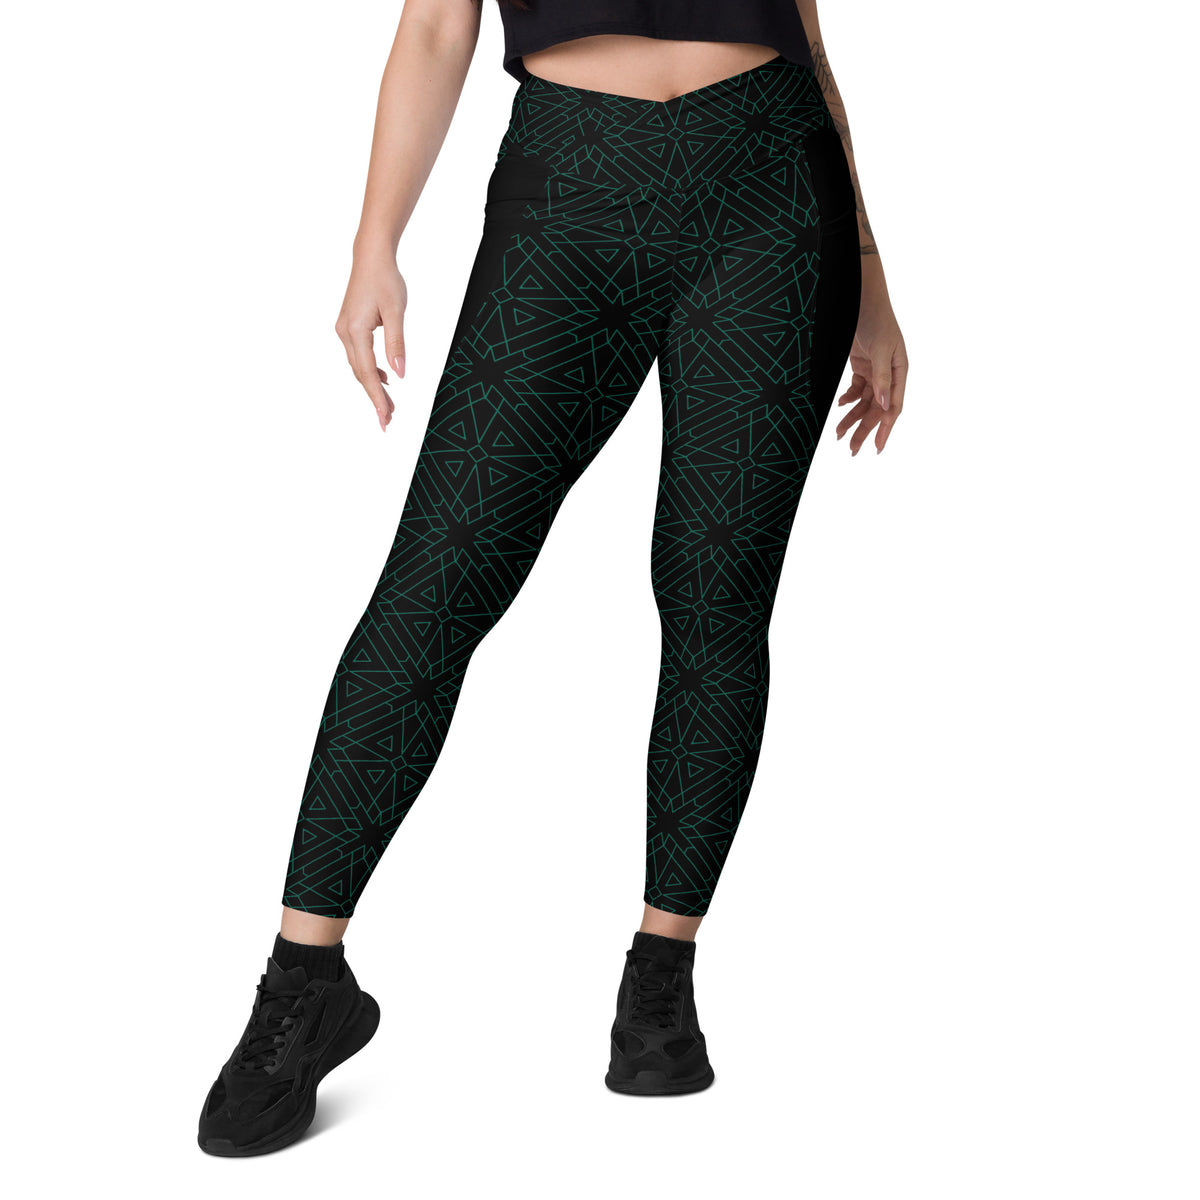 Marble-patterned crossover leggings with side pockets for women.